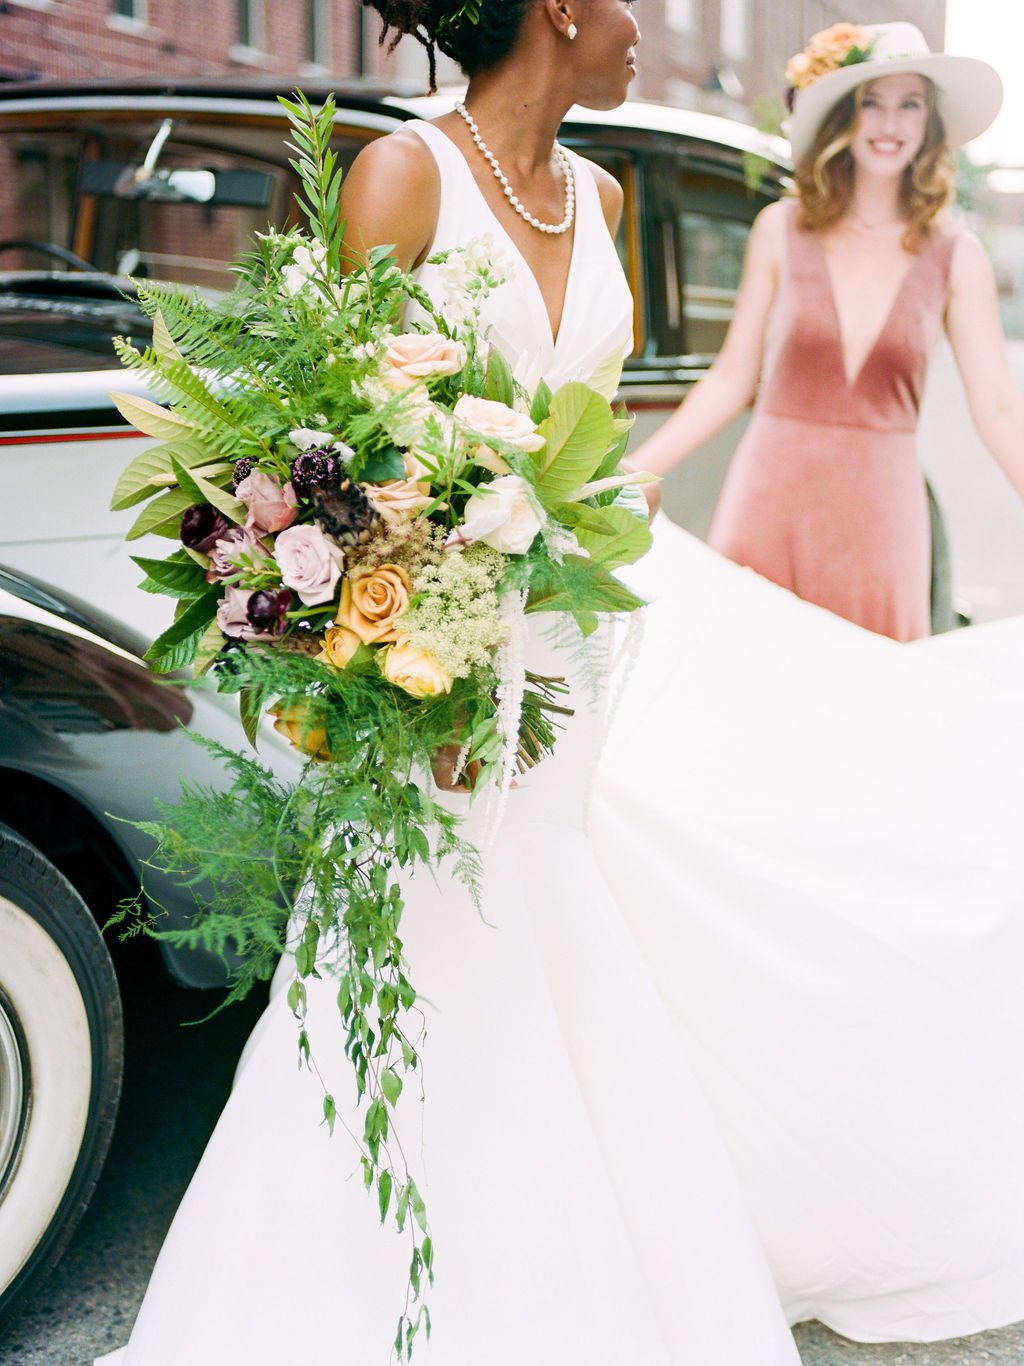 5-things-to-know-before-booking-your-wedding-florist-brought-to-you-by-savannah-wedding-planner-and-savannah-florist-ivory-and-beau-savannah-plant-riverside-district-savannah-wedding-savannah-bridal-shop-maggie-sottero-made-wiith-love-bridal-23.jpg